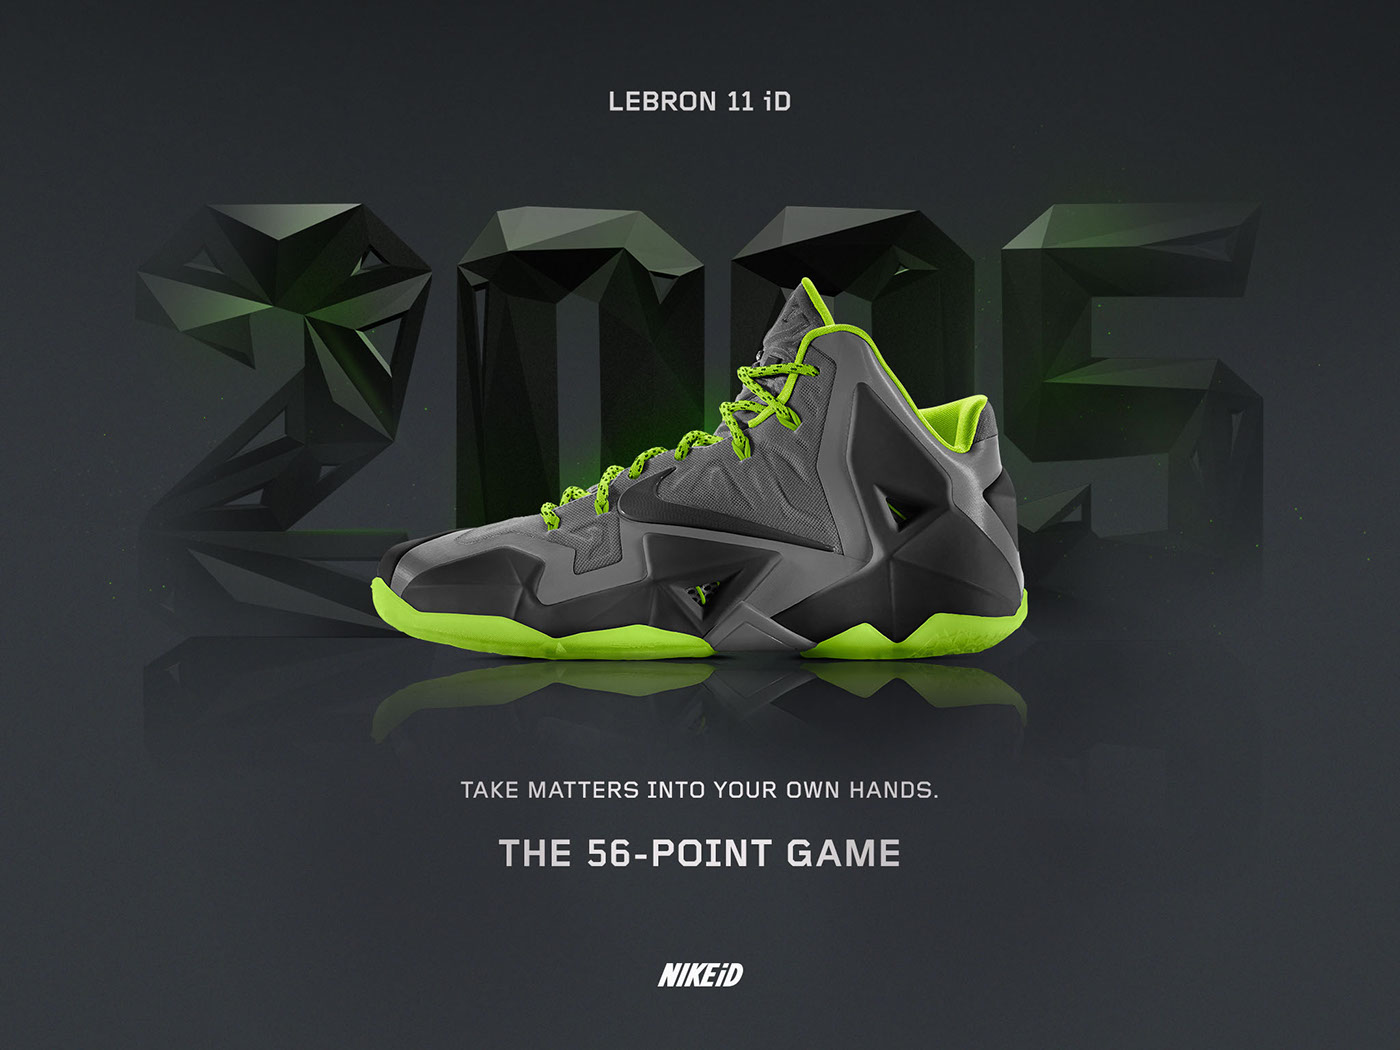 Nike labron design posters numbers 3D graphic shoes nikeid